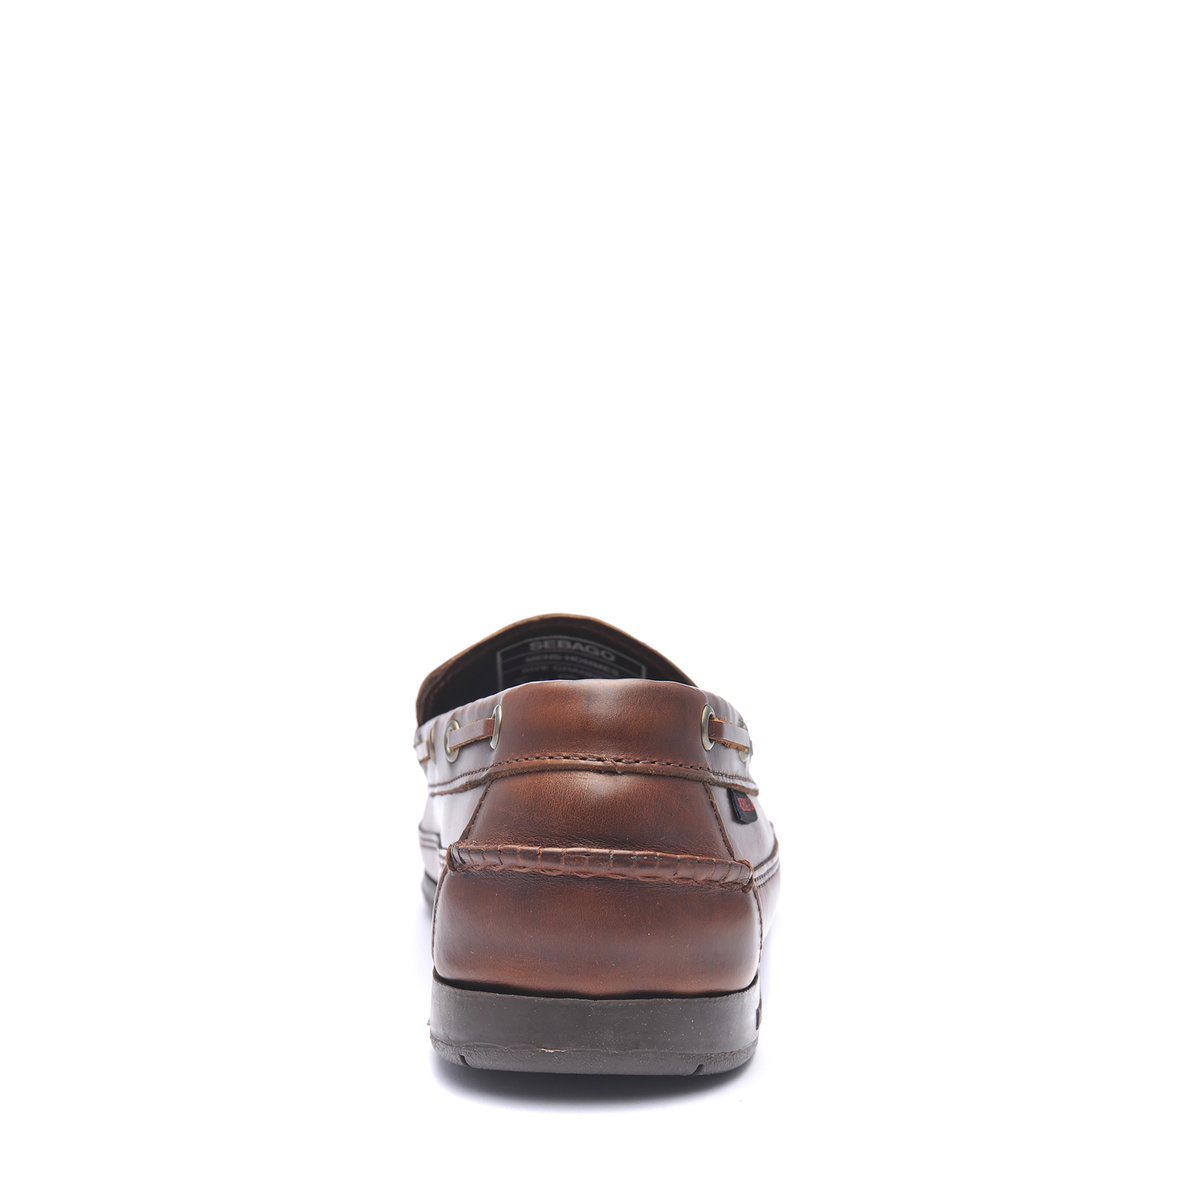 Ketch Waxed Leather Loafer